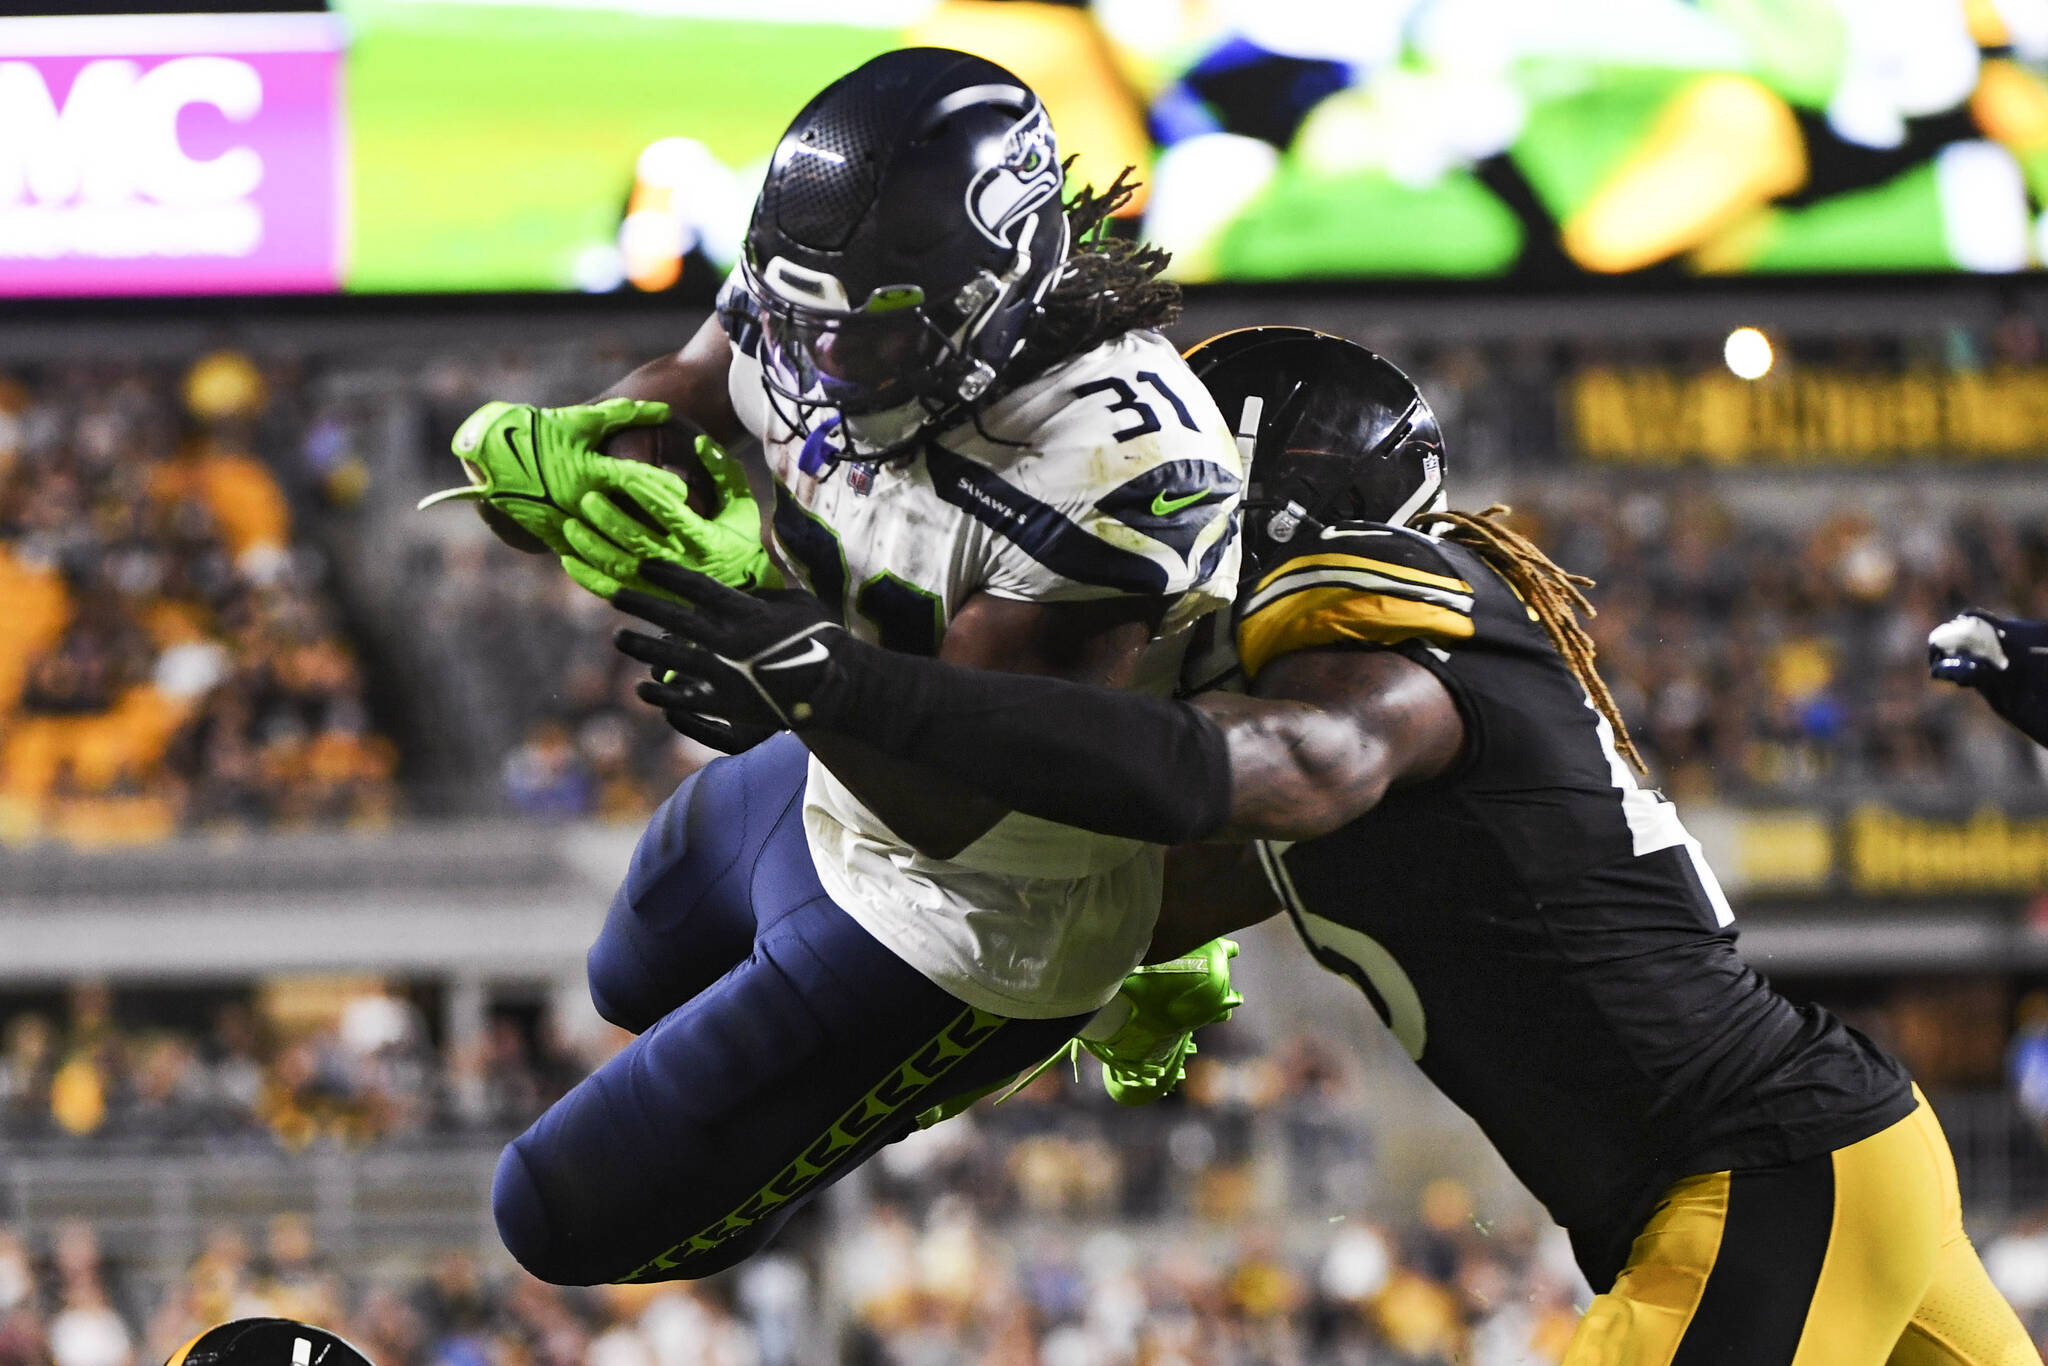 Seattle Seahawks running back DeeJay Dallas (31) leaps to the end zone for a touchdown as Pittsburgh Steelers linebacker Buddy Johnson (45) hits him during the second half of an NFL preseason football game Saturday, Aug. 13, 2022, in Pittsburgh. (AP Photo/Barry Reeger)